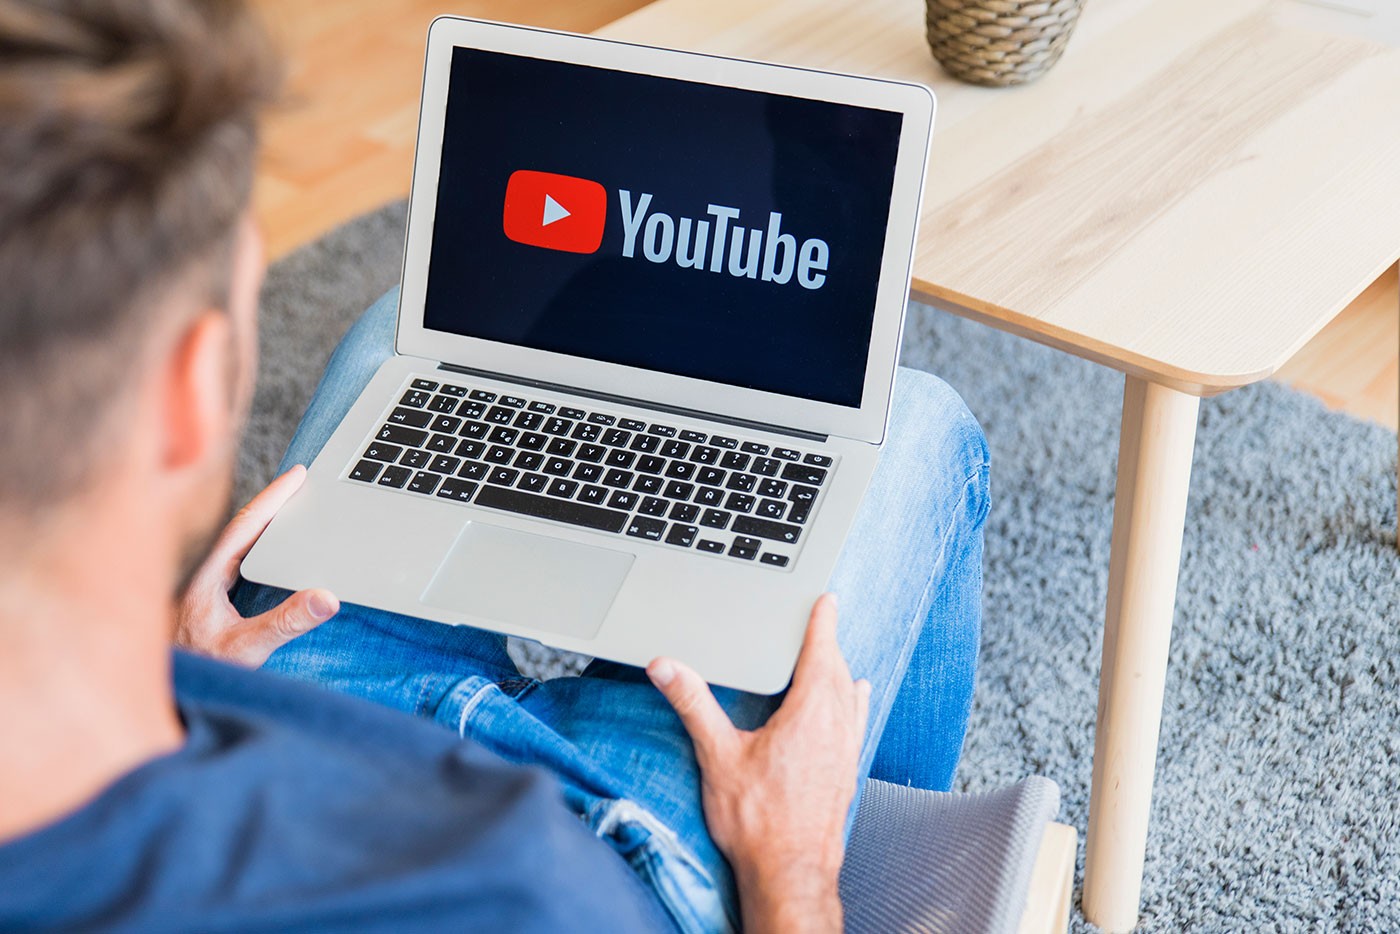 YouTube Keyword Search Will Boost Views